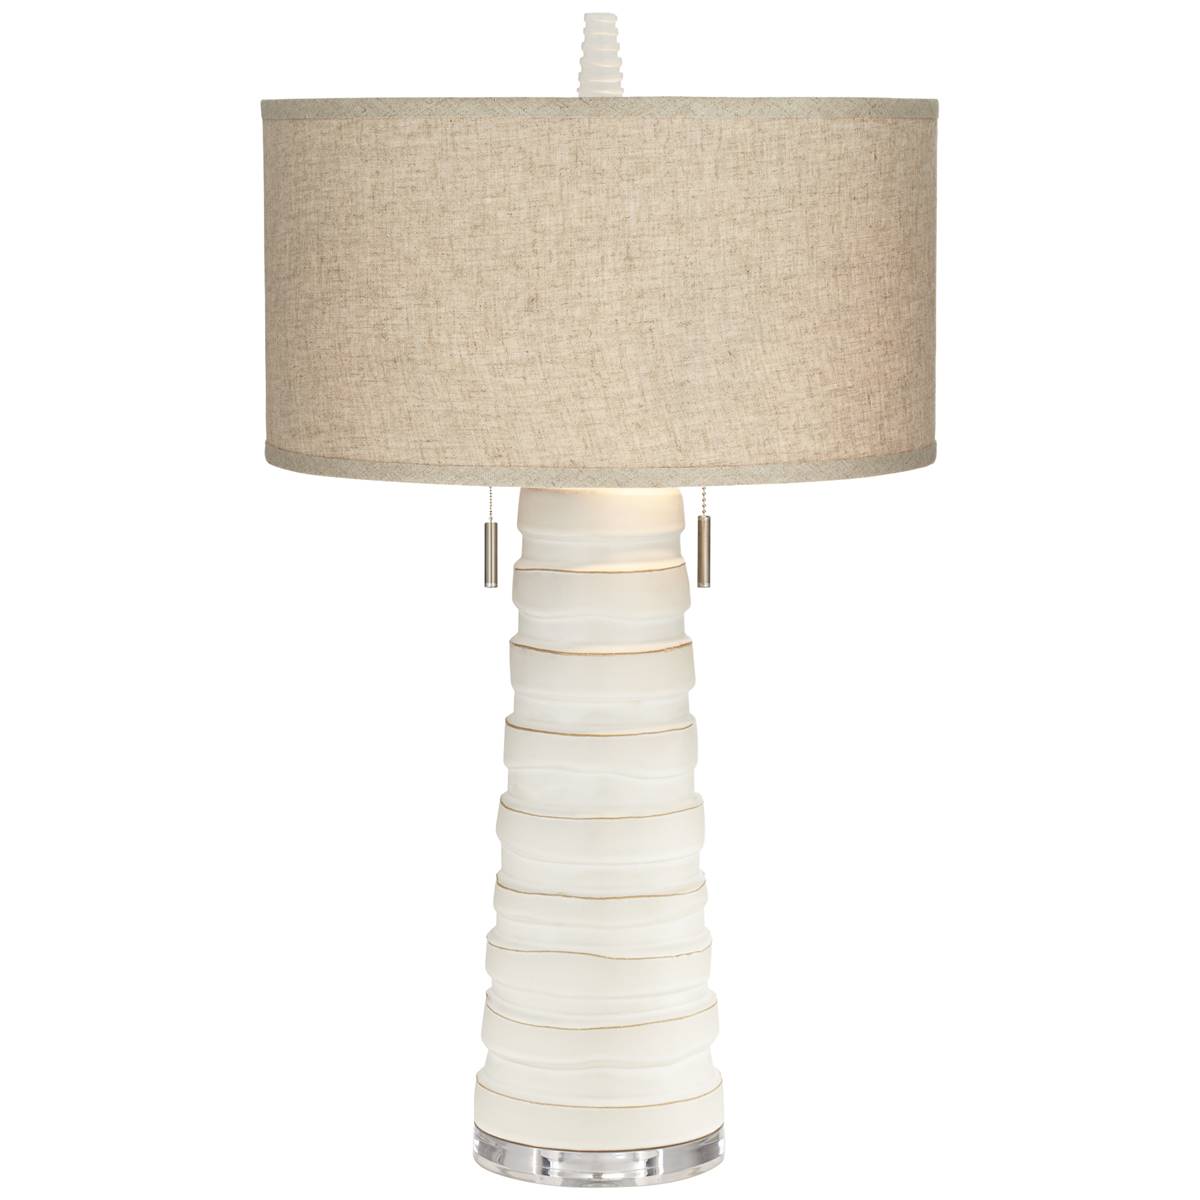 Pacific Coast Lighting Matinee 31in. White Table Lamp